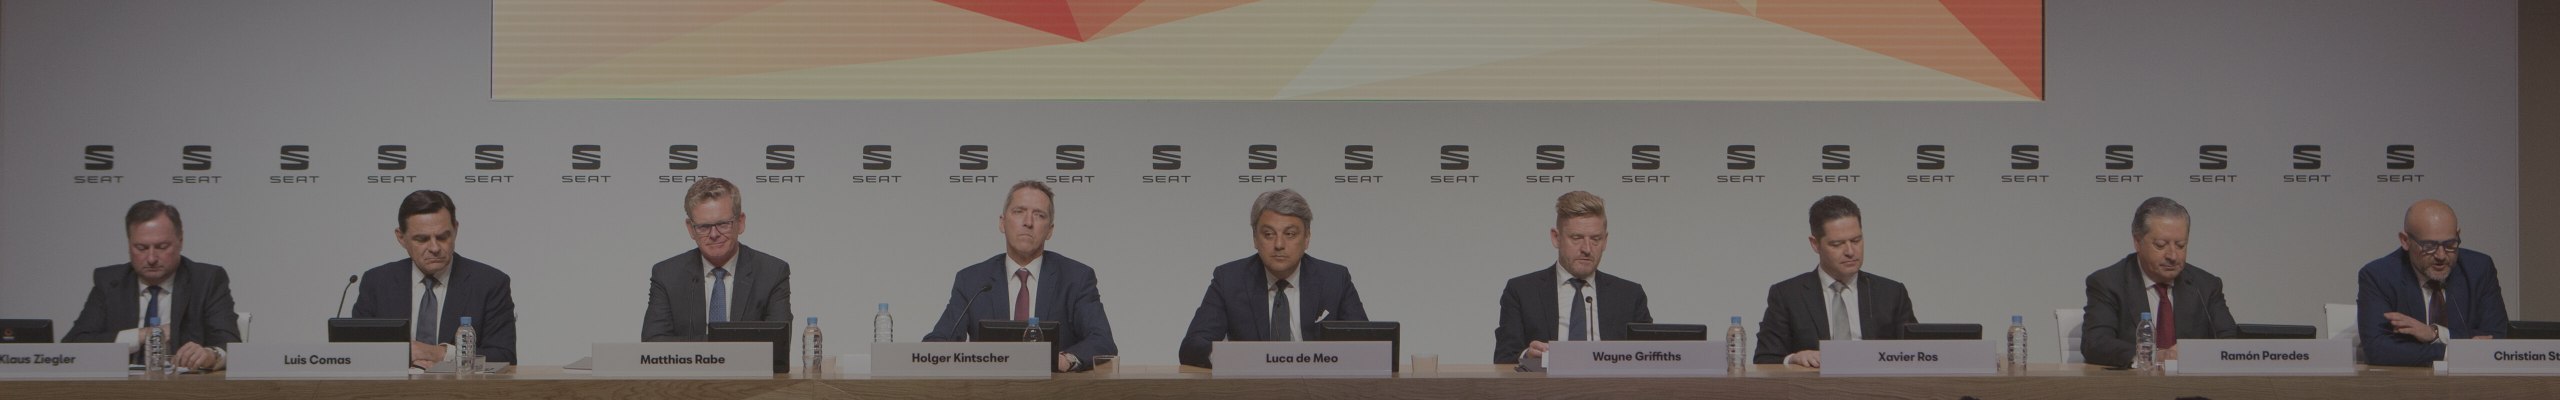 Ein Jahr der Rekorde für SEAT - SEAT commitee of Directors. President and CEO Luca de Meo at SEAT Annual media conference 2018